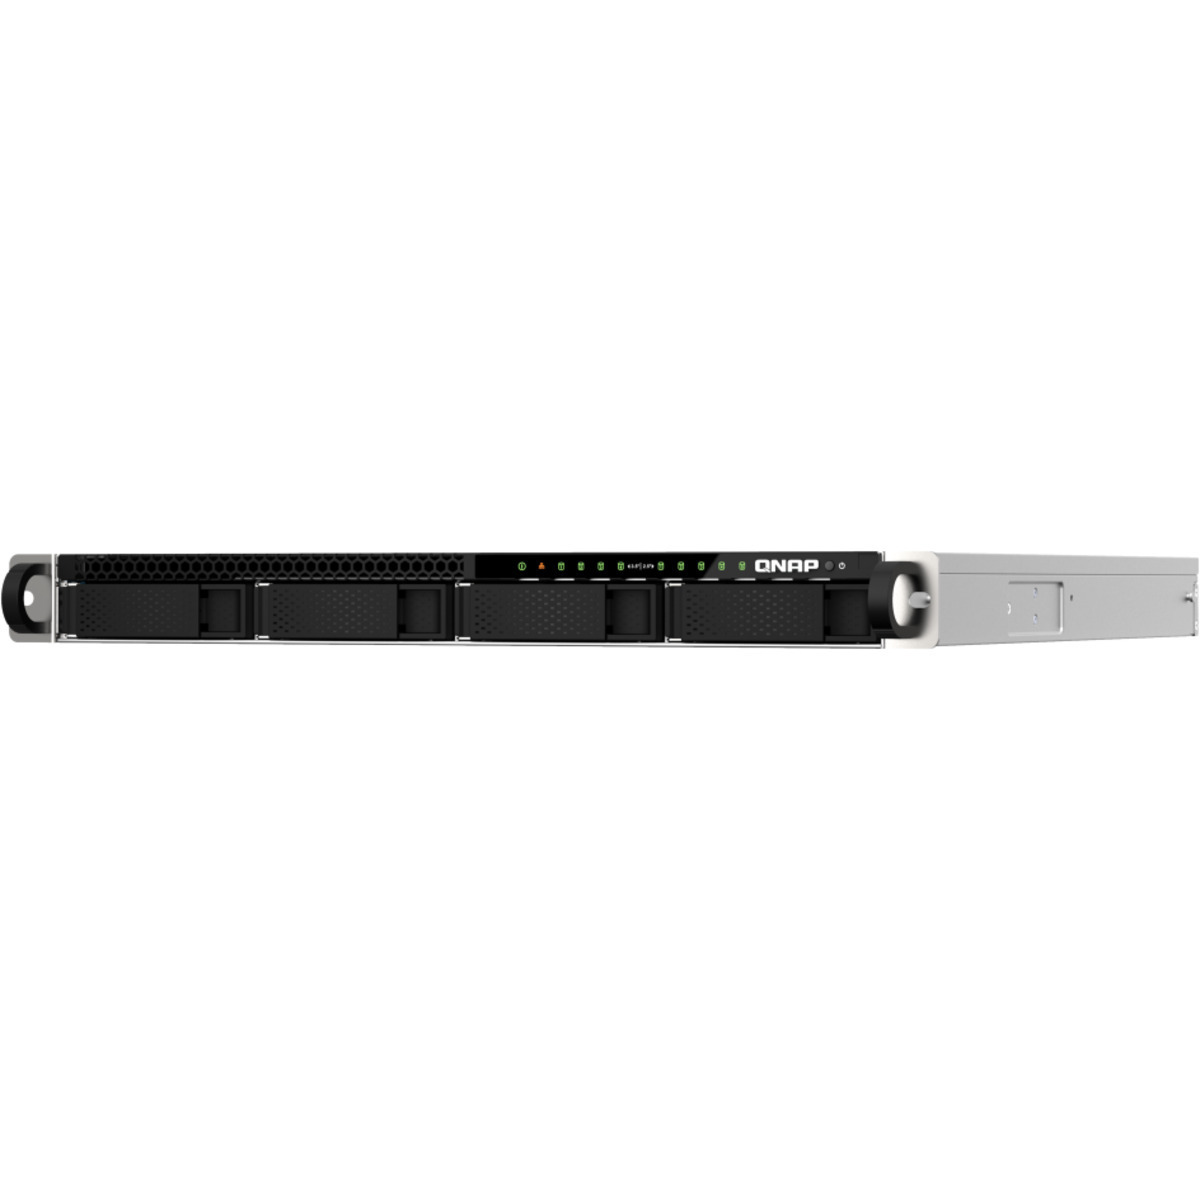 buy QNAP TS-h987XU-RP QuTS hero Edition RackMount NAS - Network Attached Storage Device Burn-In Tested Configurations - nas headquarters buy network attached storage server device das new raid-5 free shipping usa TS-h987XU-RP QuTS hero Edition